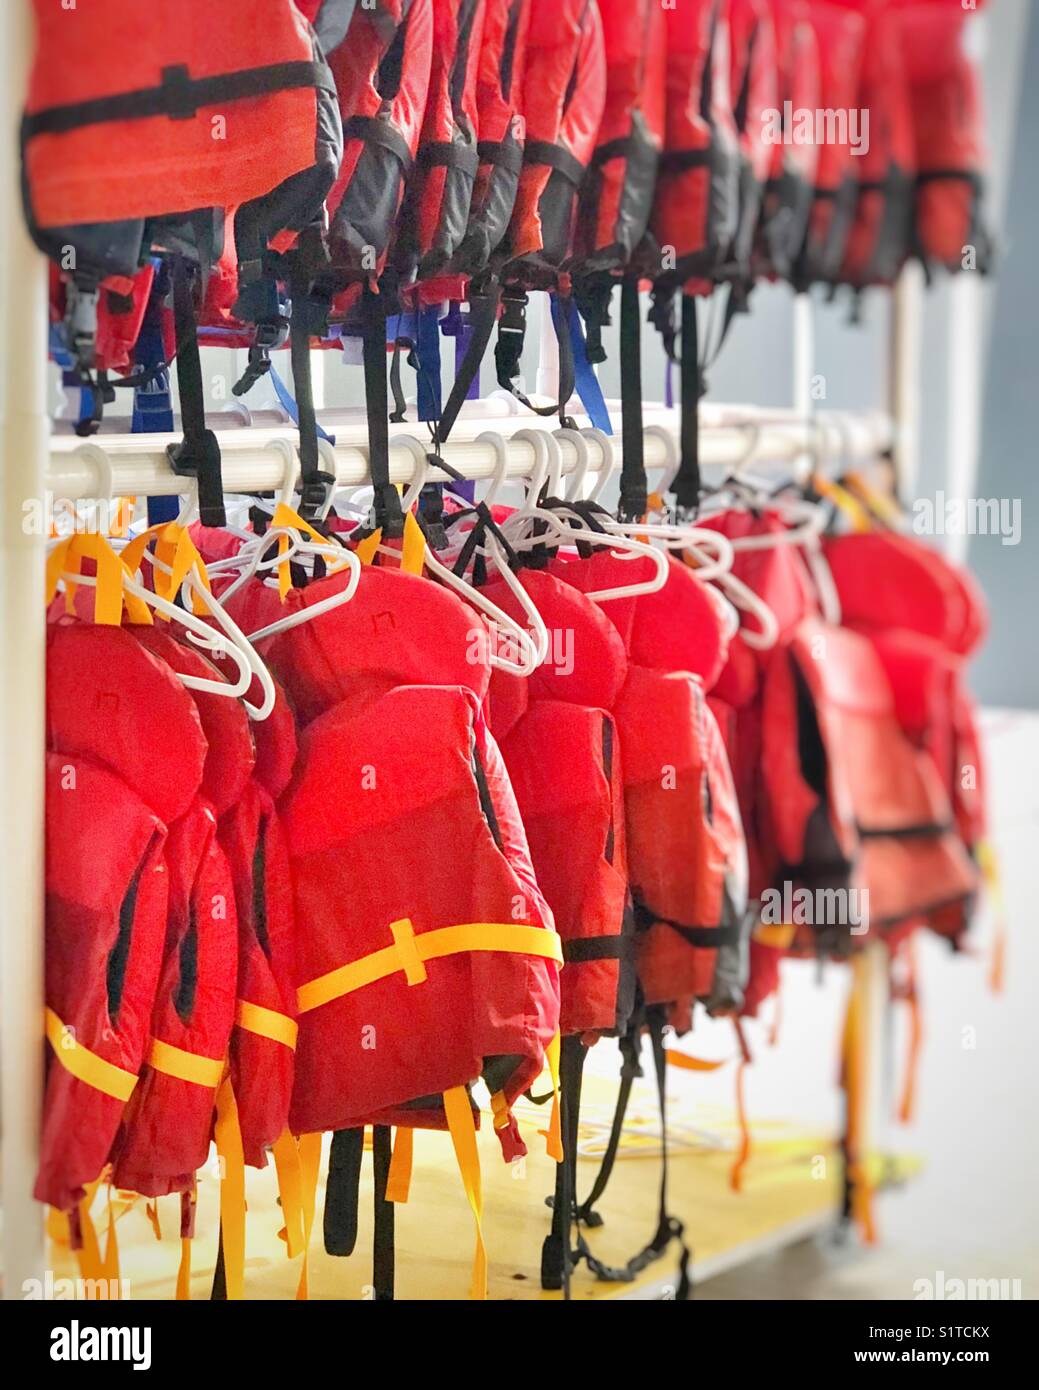 Red life jackets hanging poolside in a community recreation centre Stock Photo